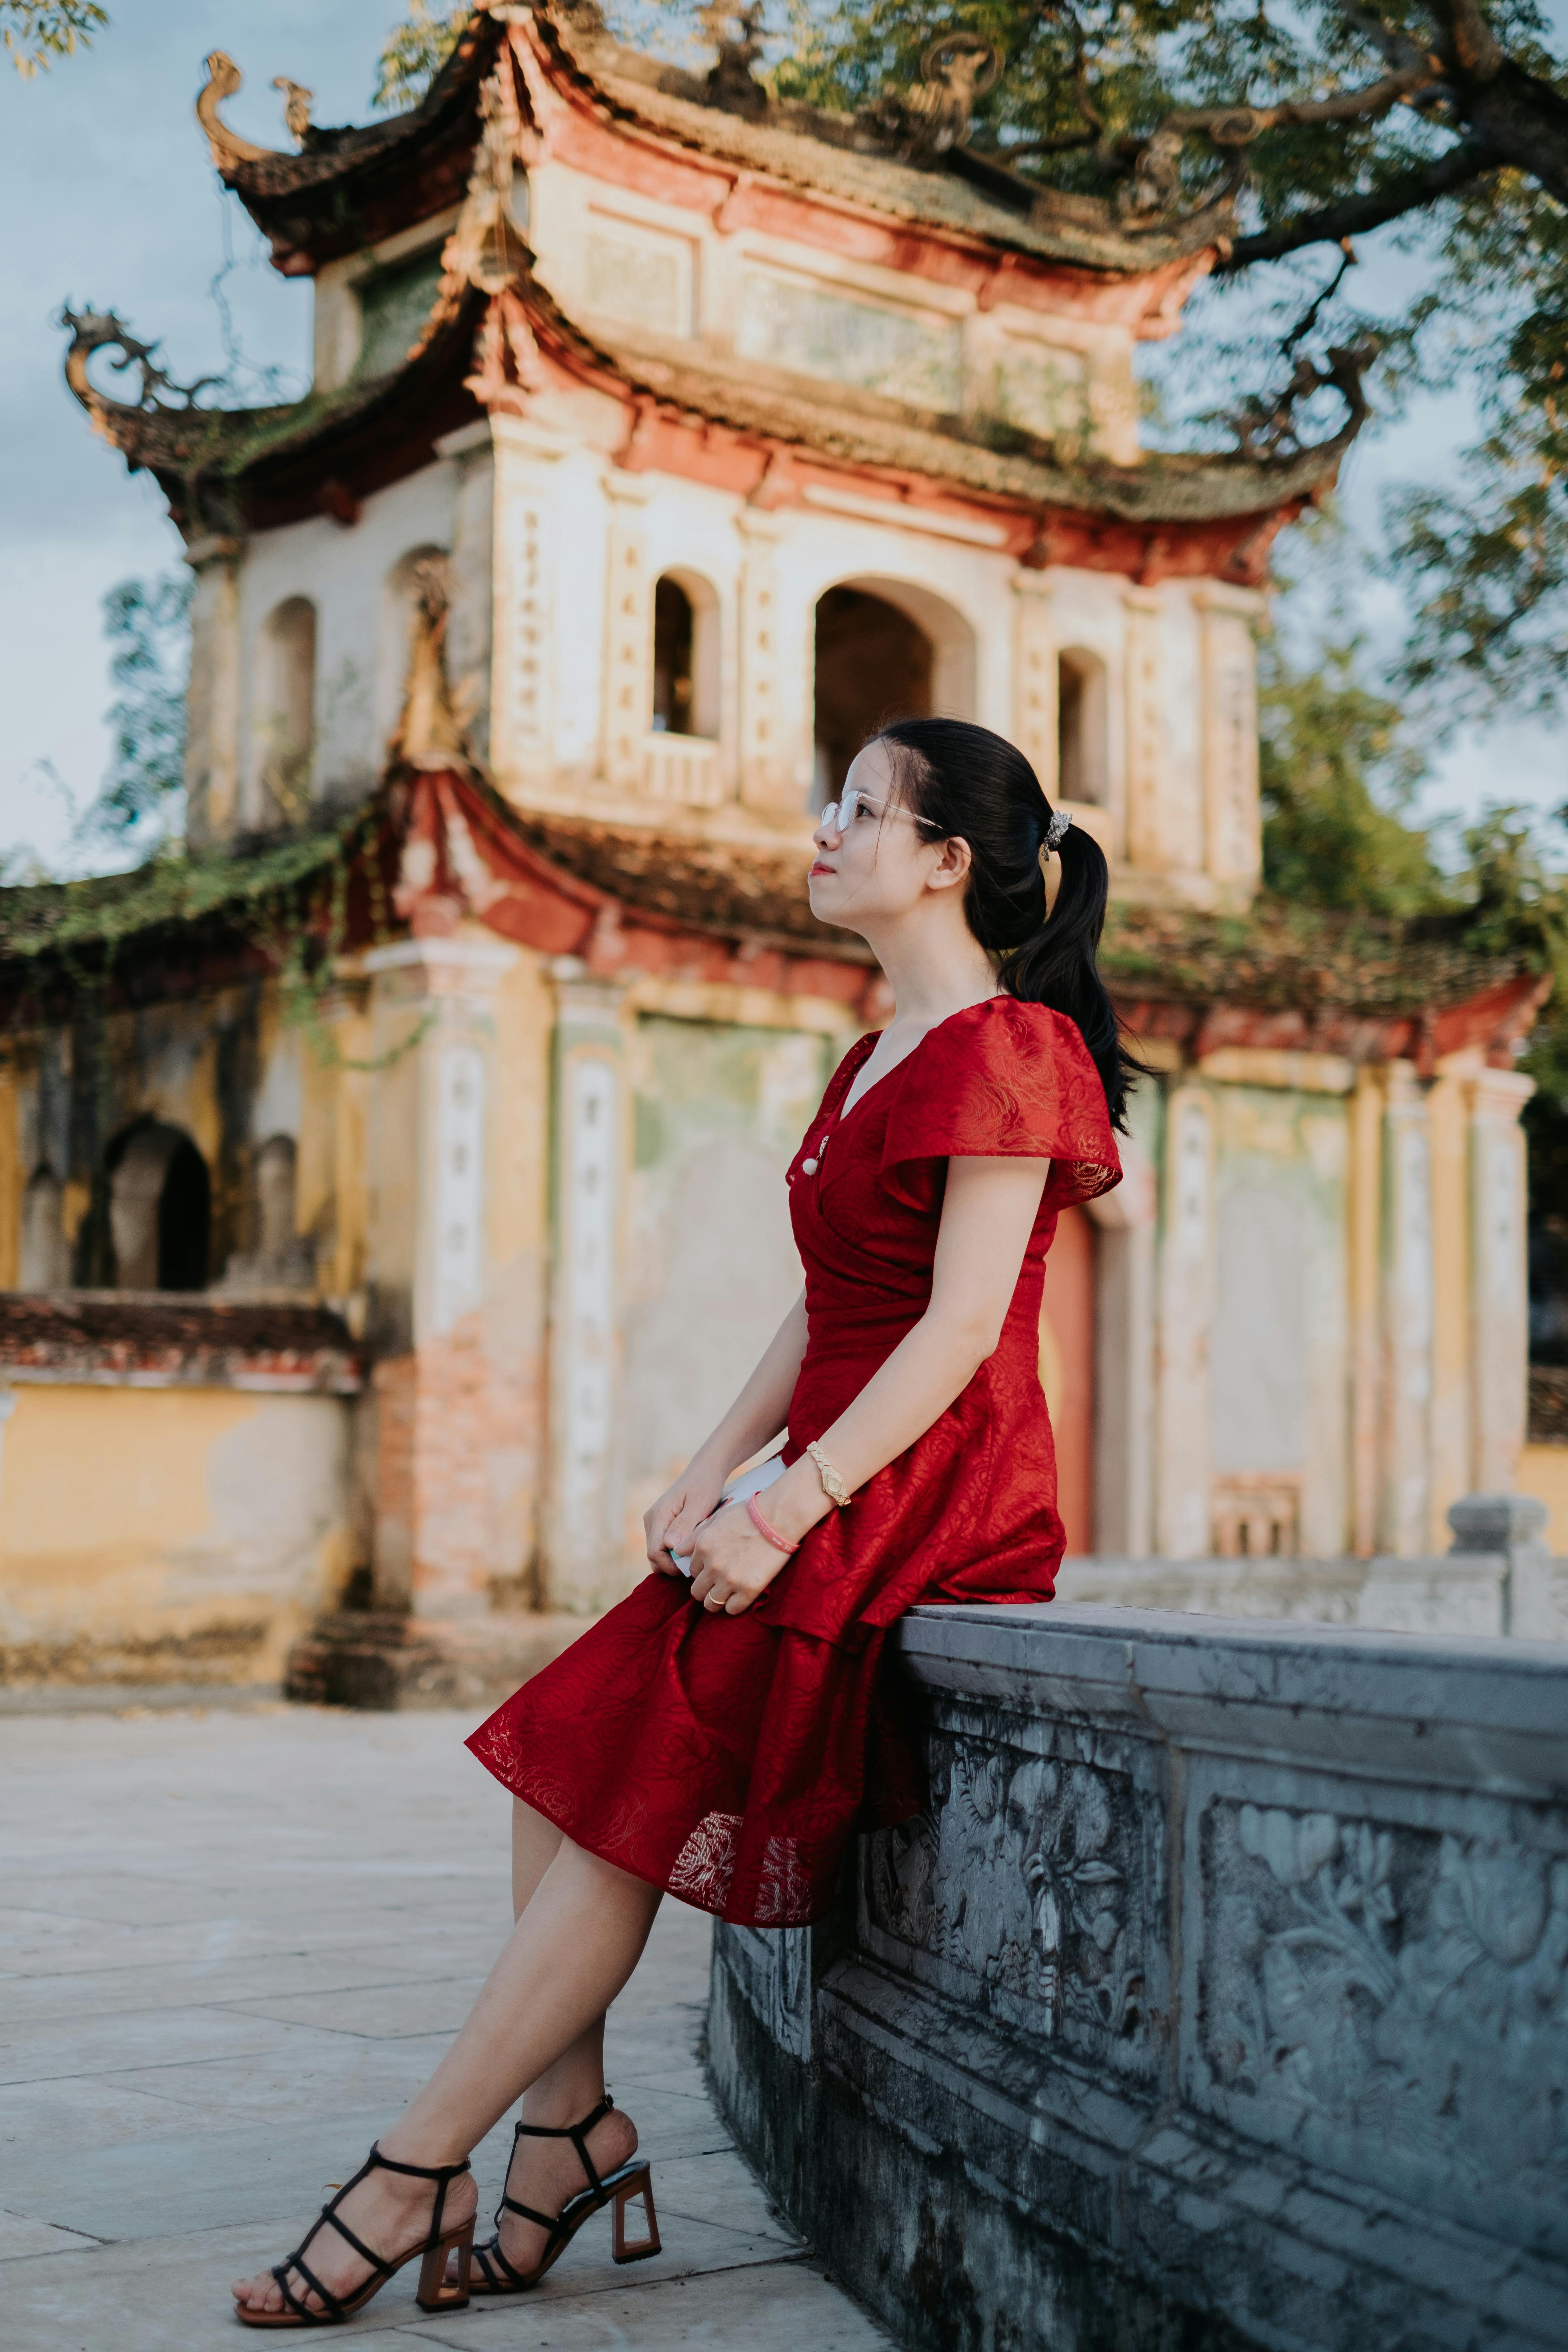 Woman Posing in Red Dress outside a Pagoda · Free Stock Photo